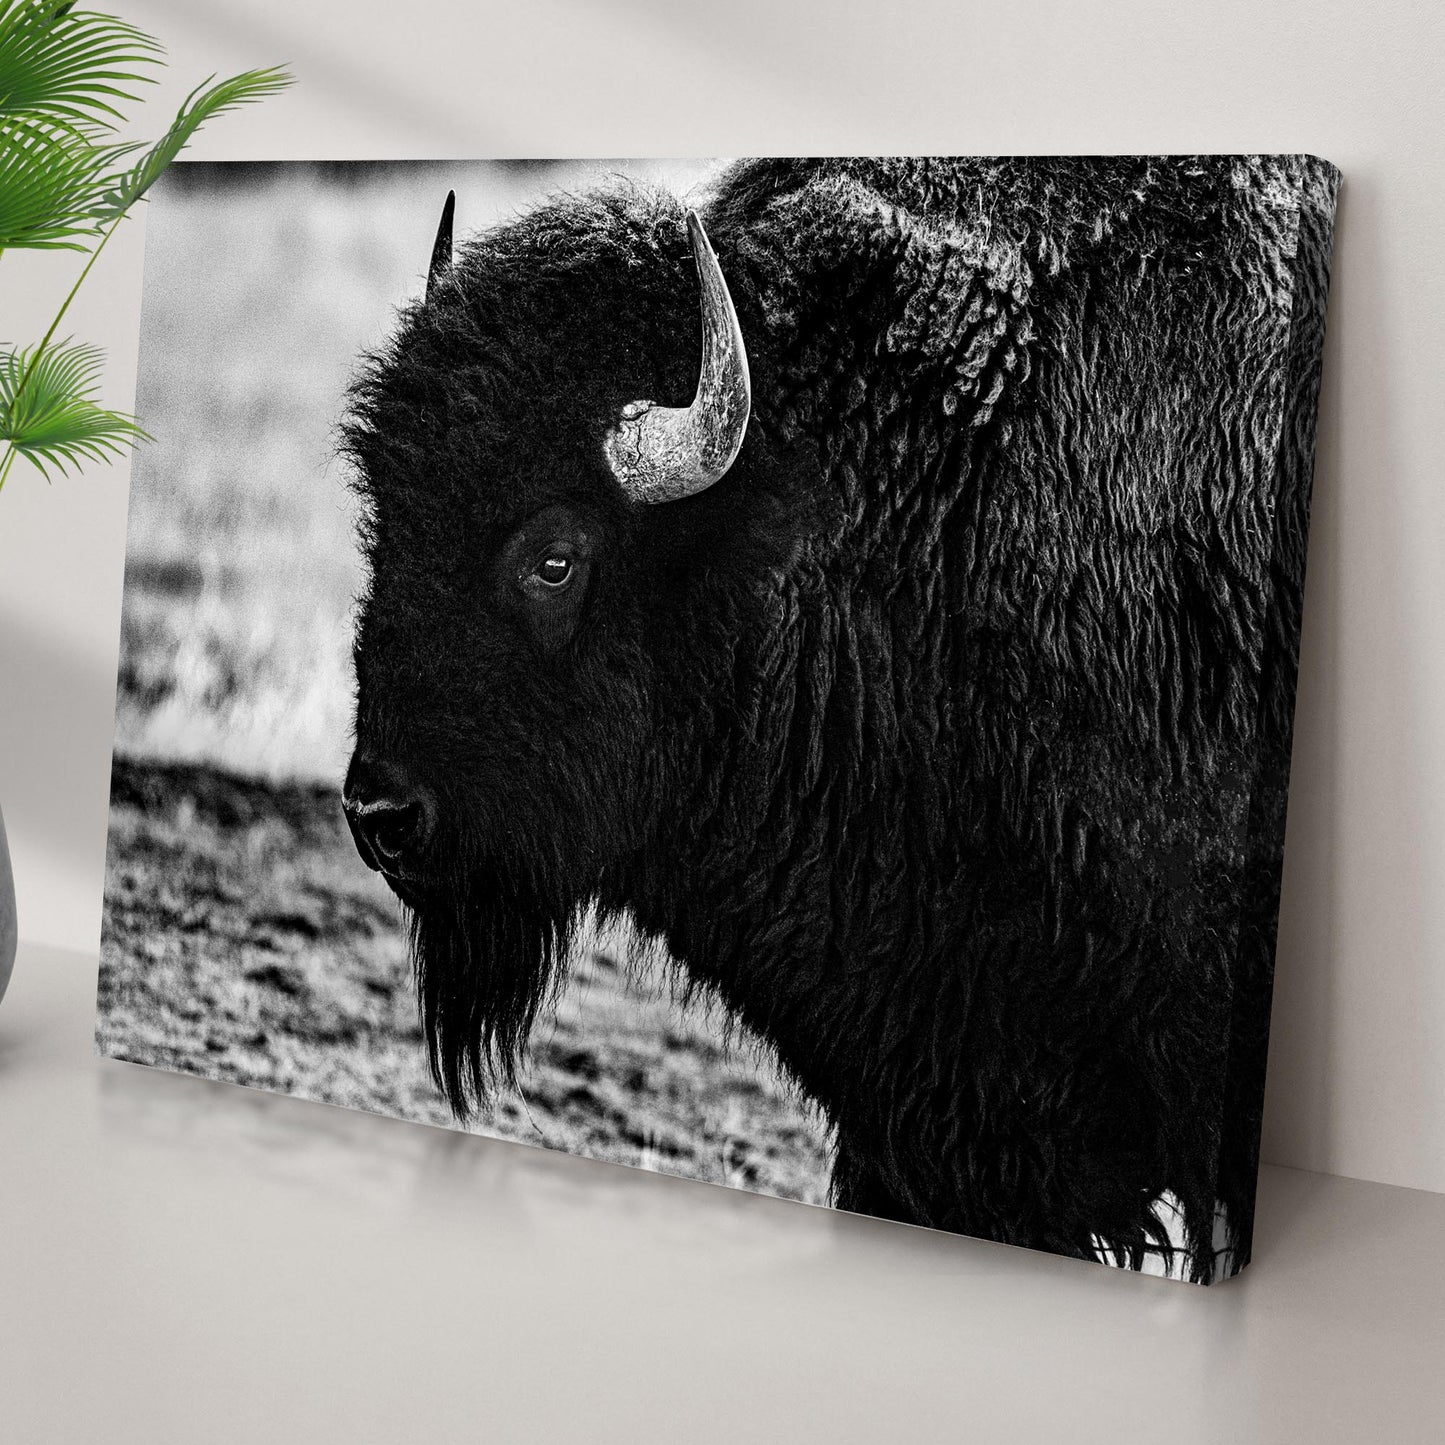 Black and White Bison Canvas Wall Art Style 2 - Image by Tailored Canvases